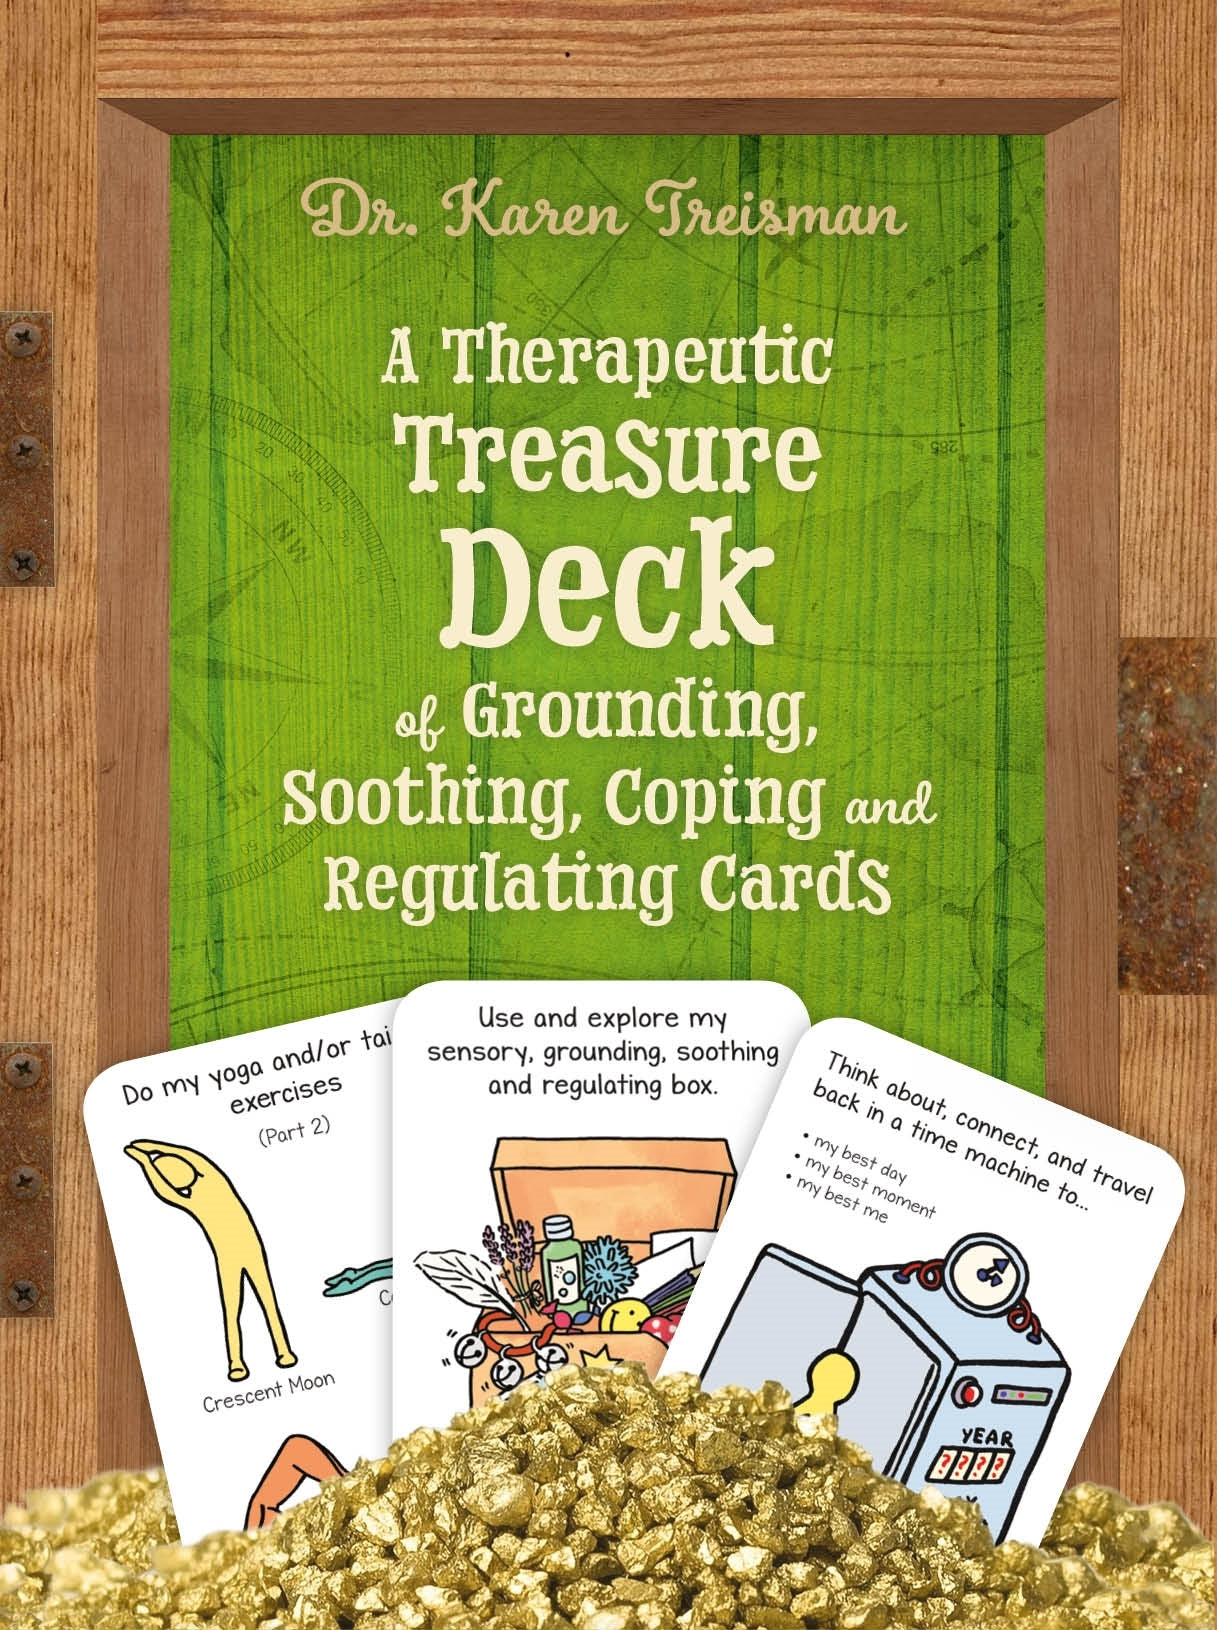 A Therapeutic Treasure Deck of Grounding, Soothing, Coping and Regulating Cards by Karen Treisman